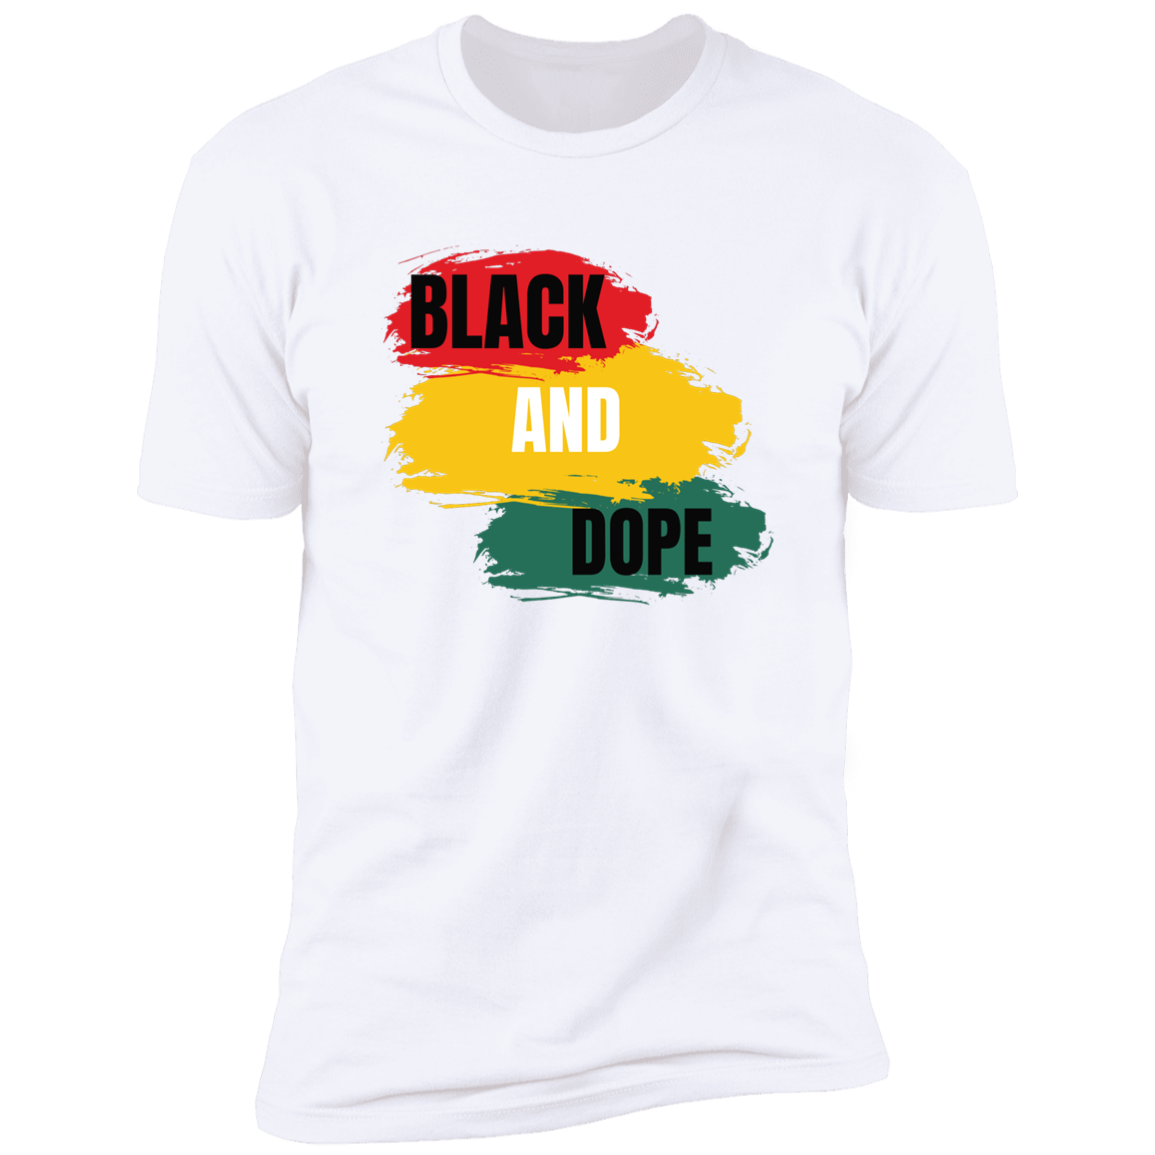 Black and Dope Tee